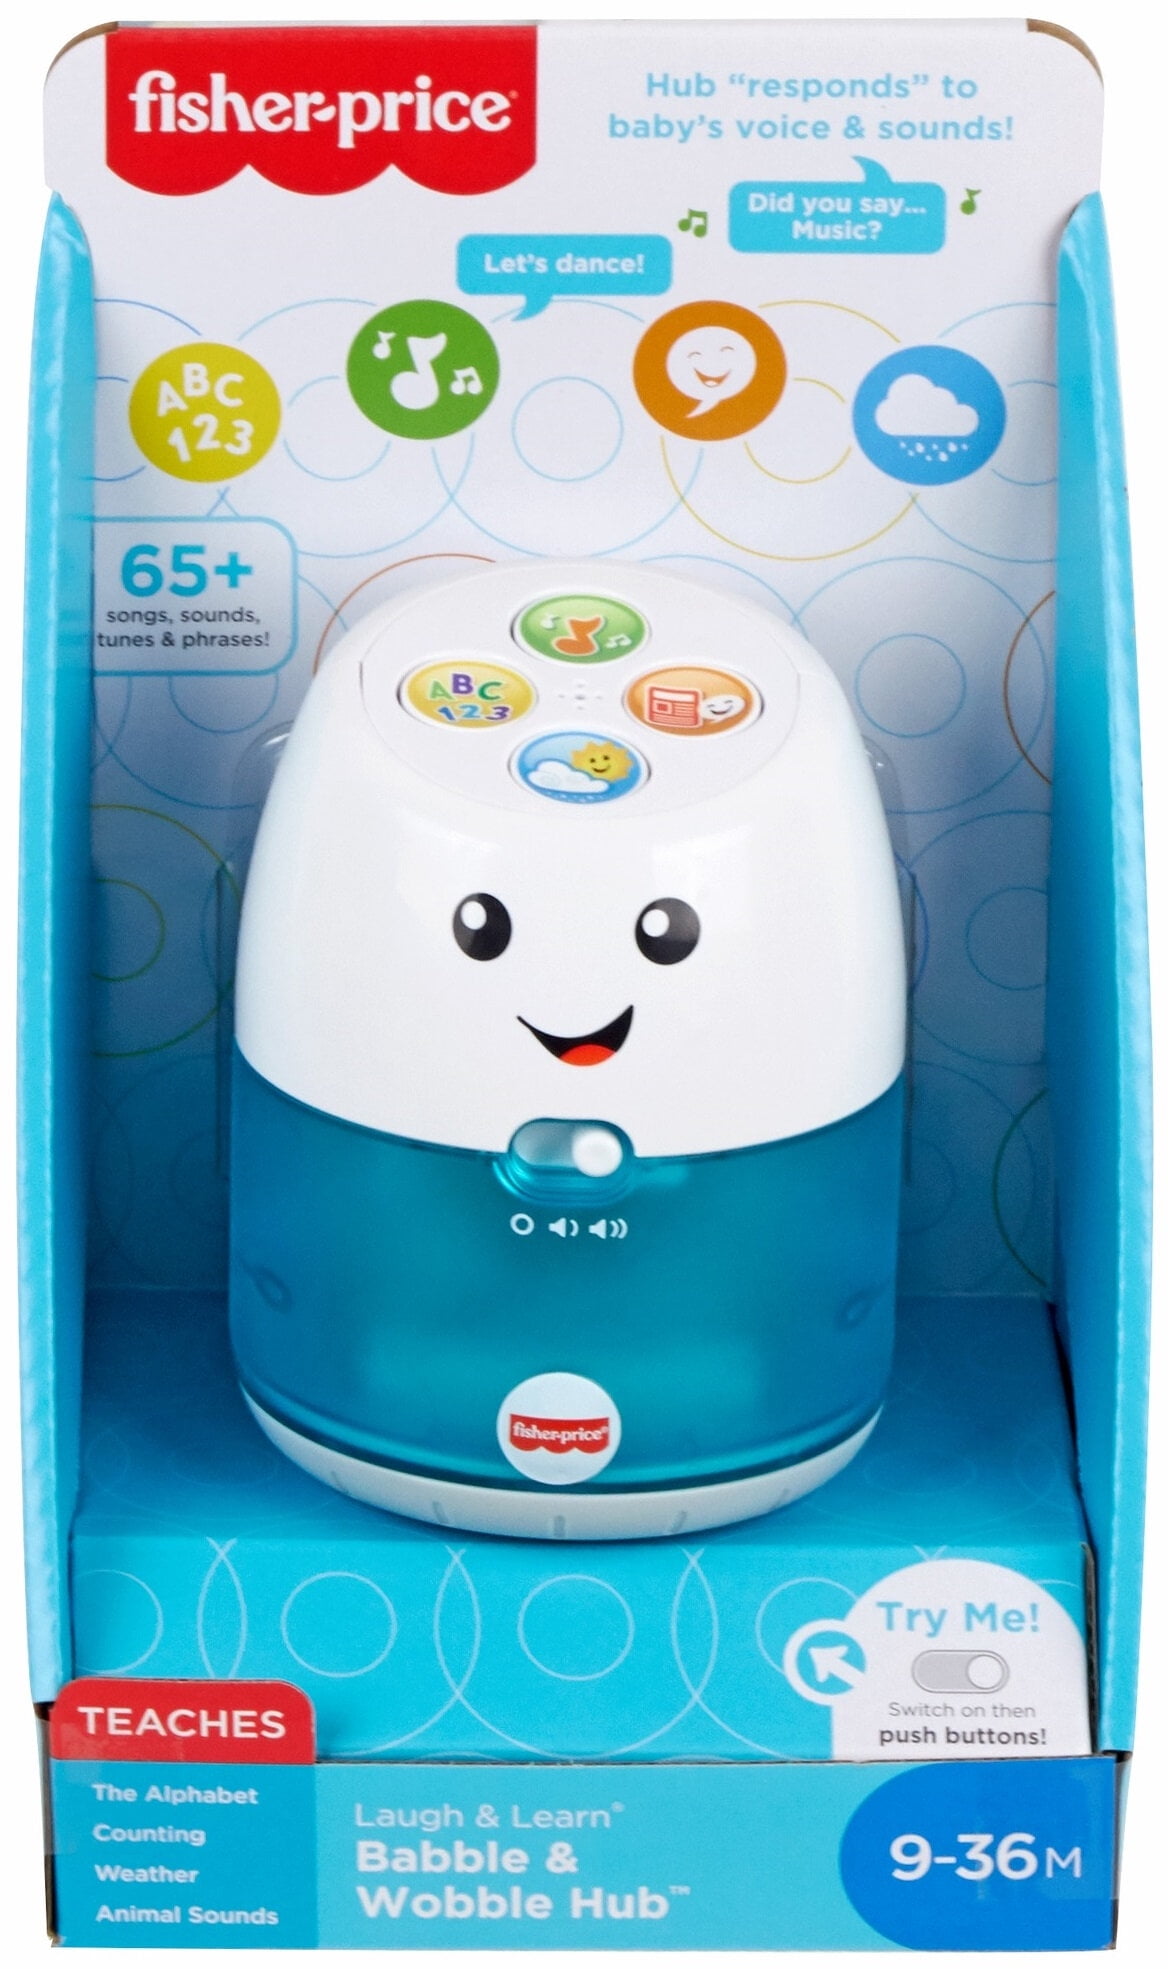 Fisher-Price Laugh & Learn Babble & Wobble Hub for sale online 